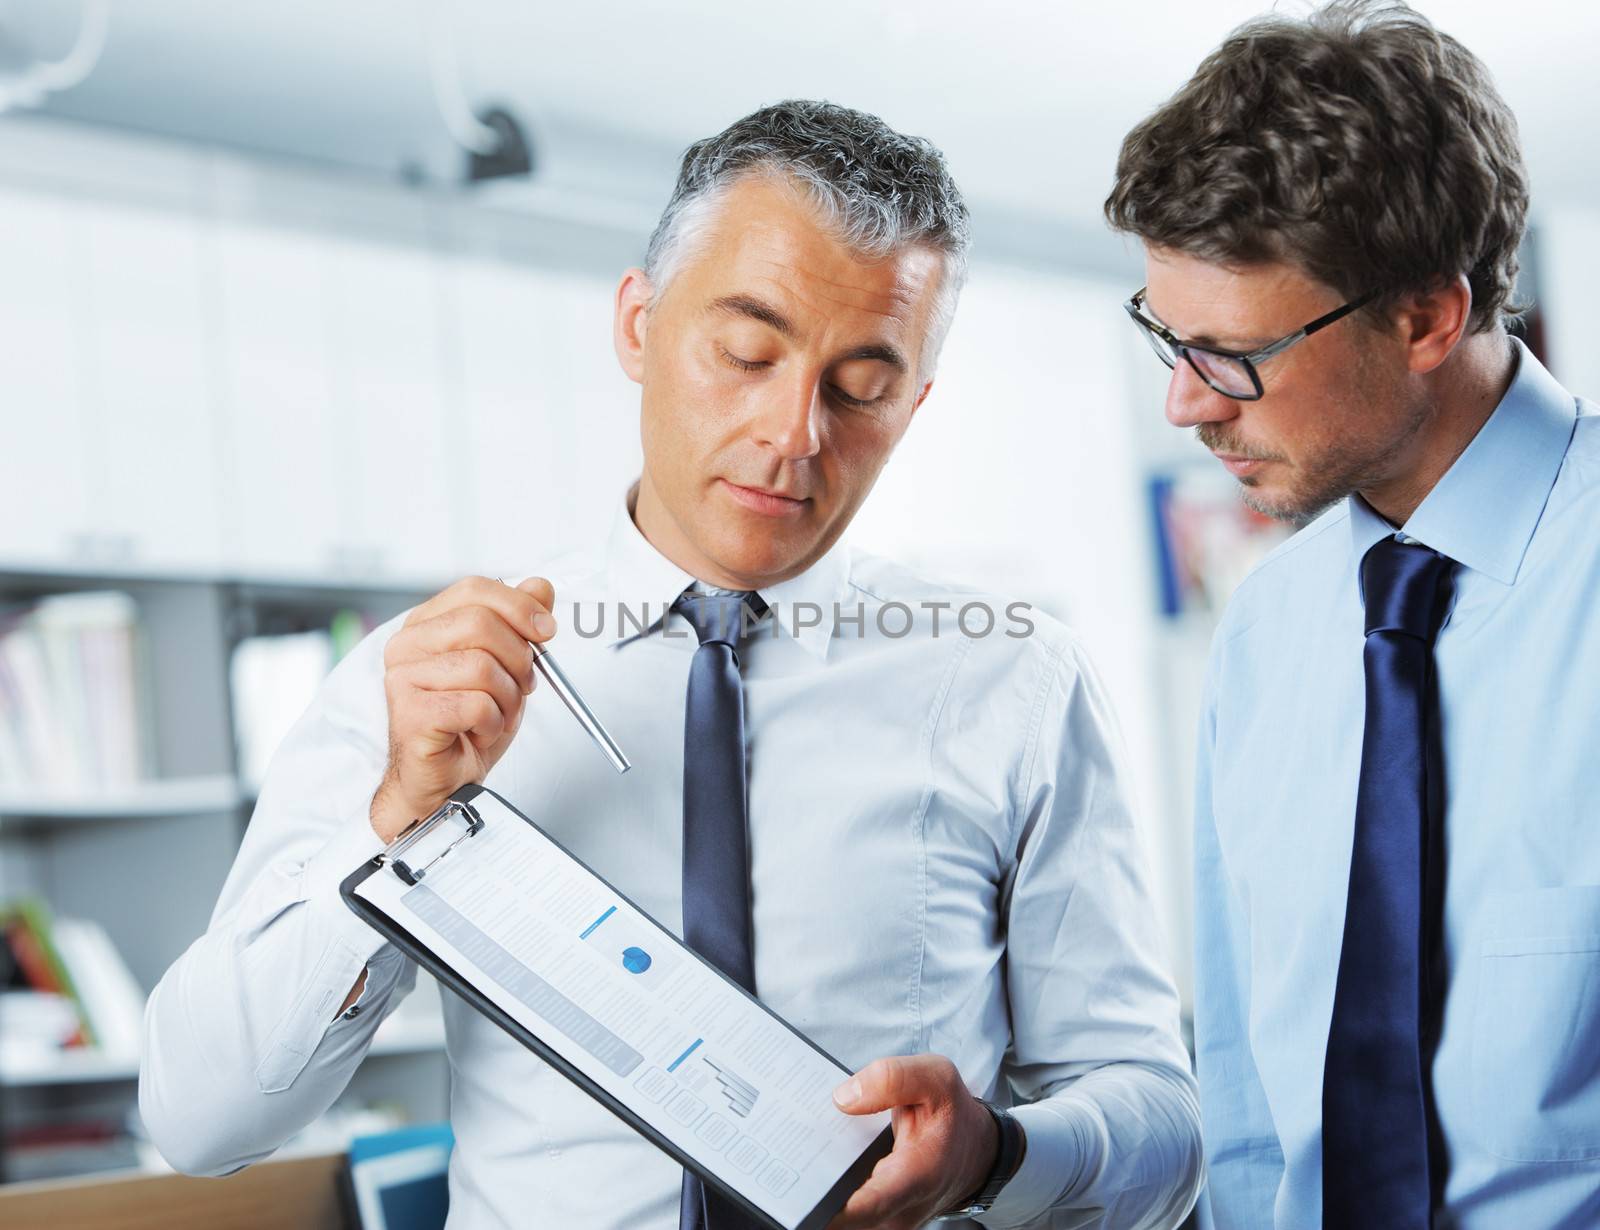 Business men discussing together in an office